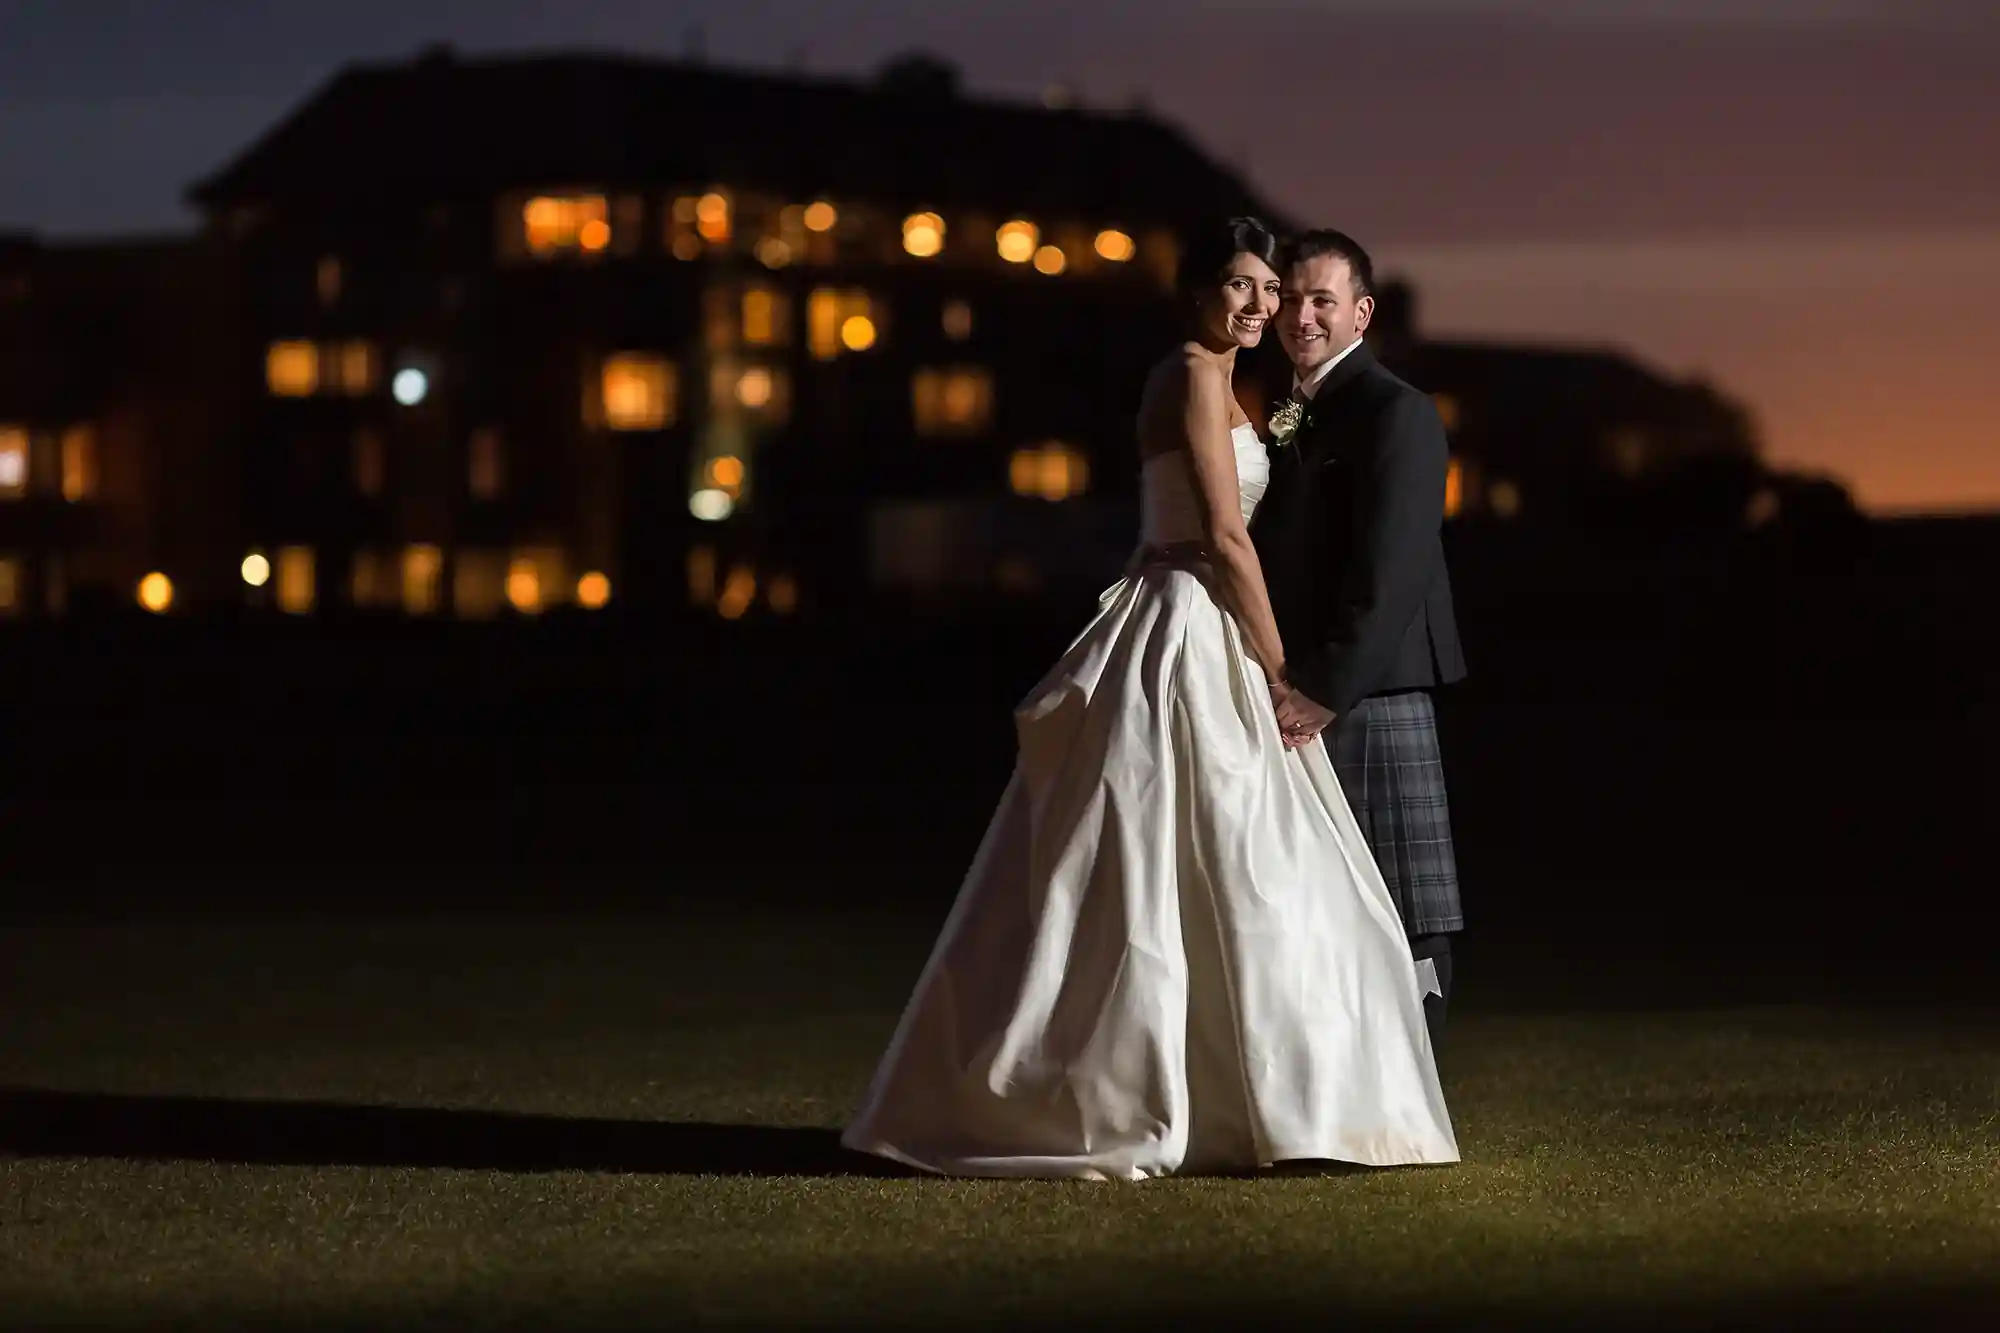 A newlywed couple, the bride in a white gown and the groom in a kilt, posing at dusk with a dimly lit building in the background.